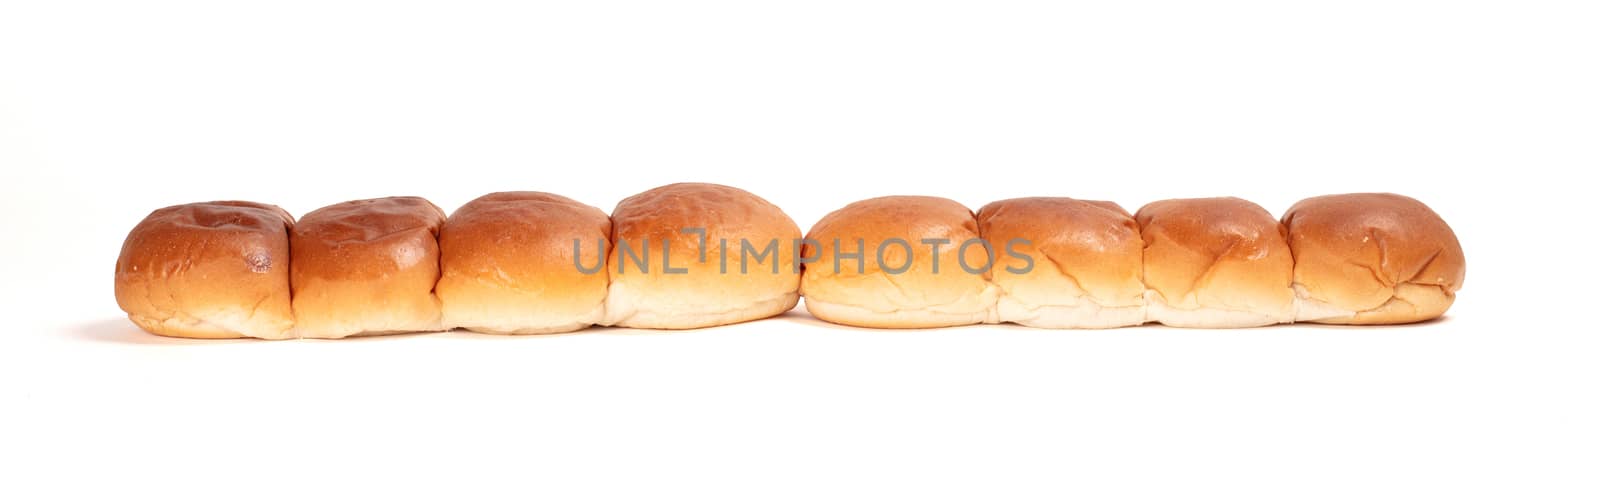 View of group small round bread by michaklootwijk